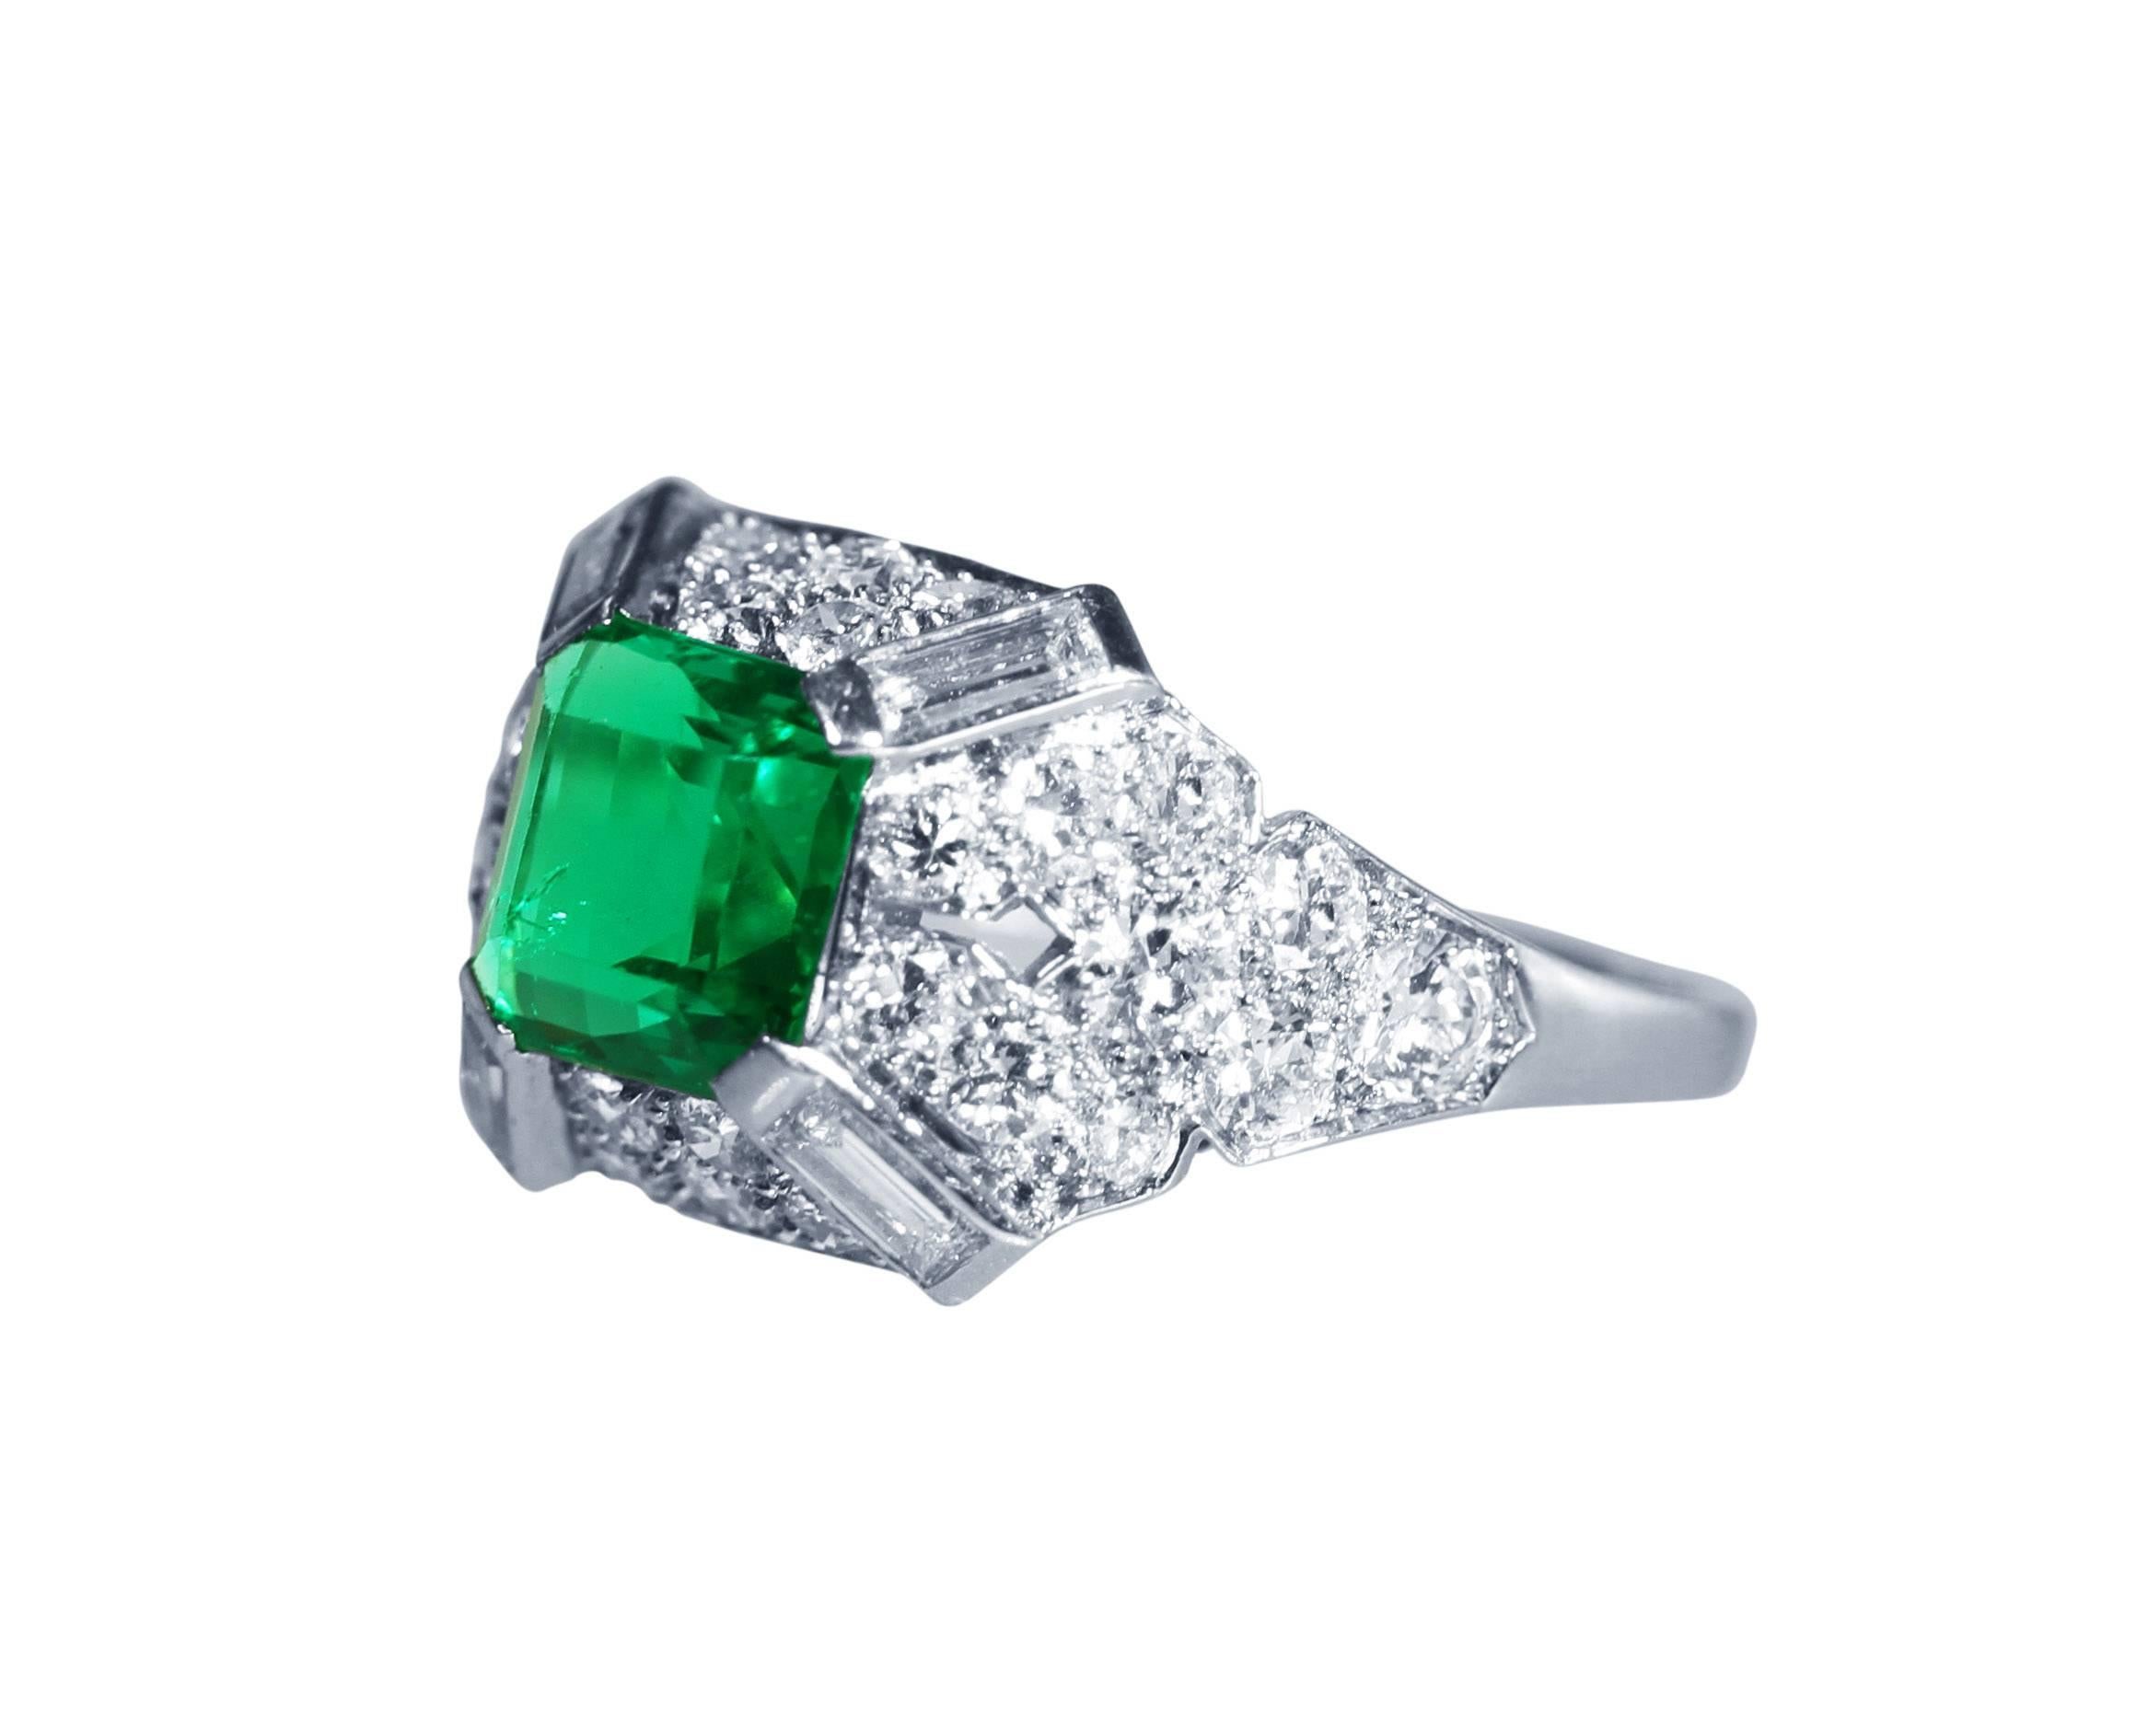 Art Deco platinum, emerald and diamond ring, set in the center with an exceptional natural emerald-cut emerald weighing approximately 1.90 carats, accented by 30 round diamonds weighing approximately 1.75 carats, further set with 4 baguette diamonds